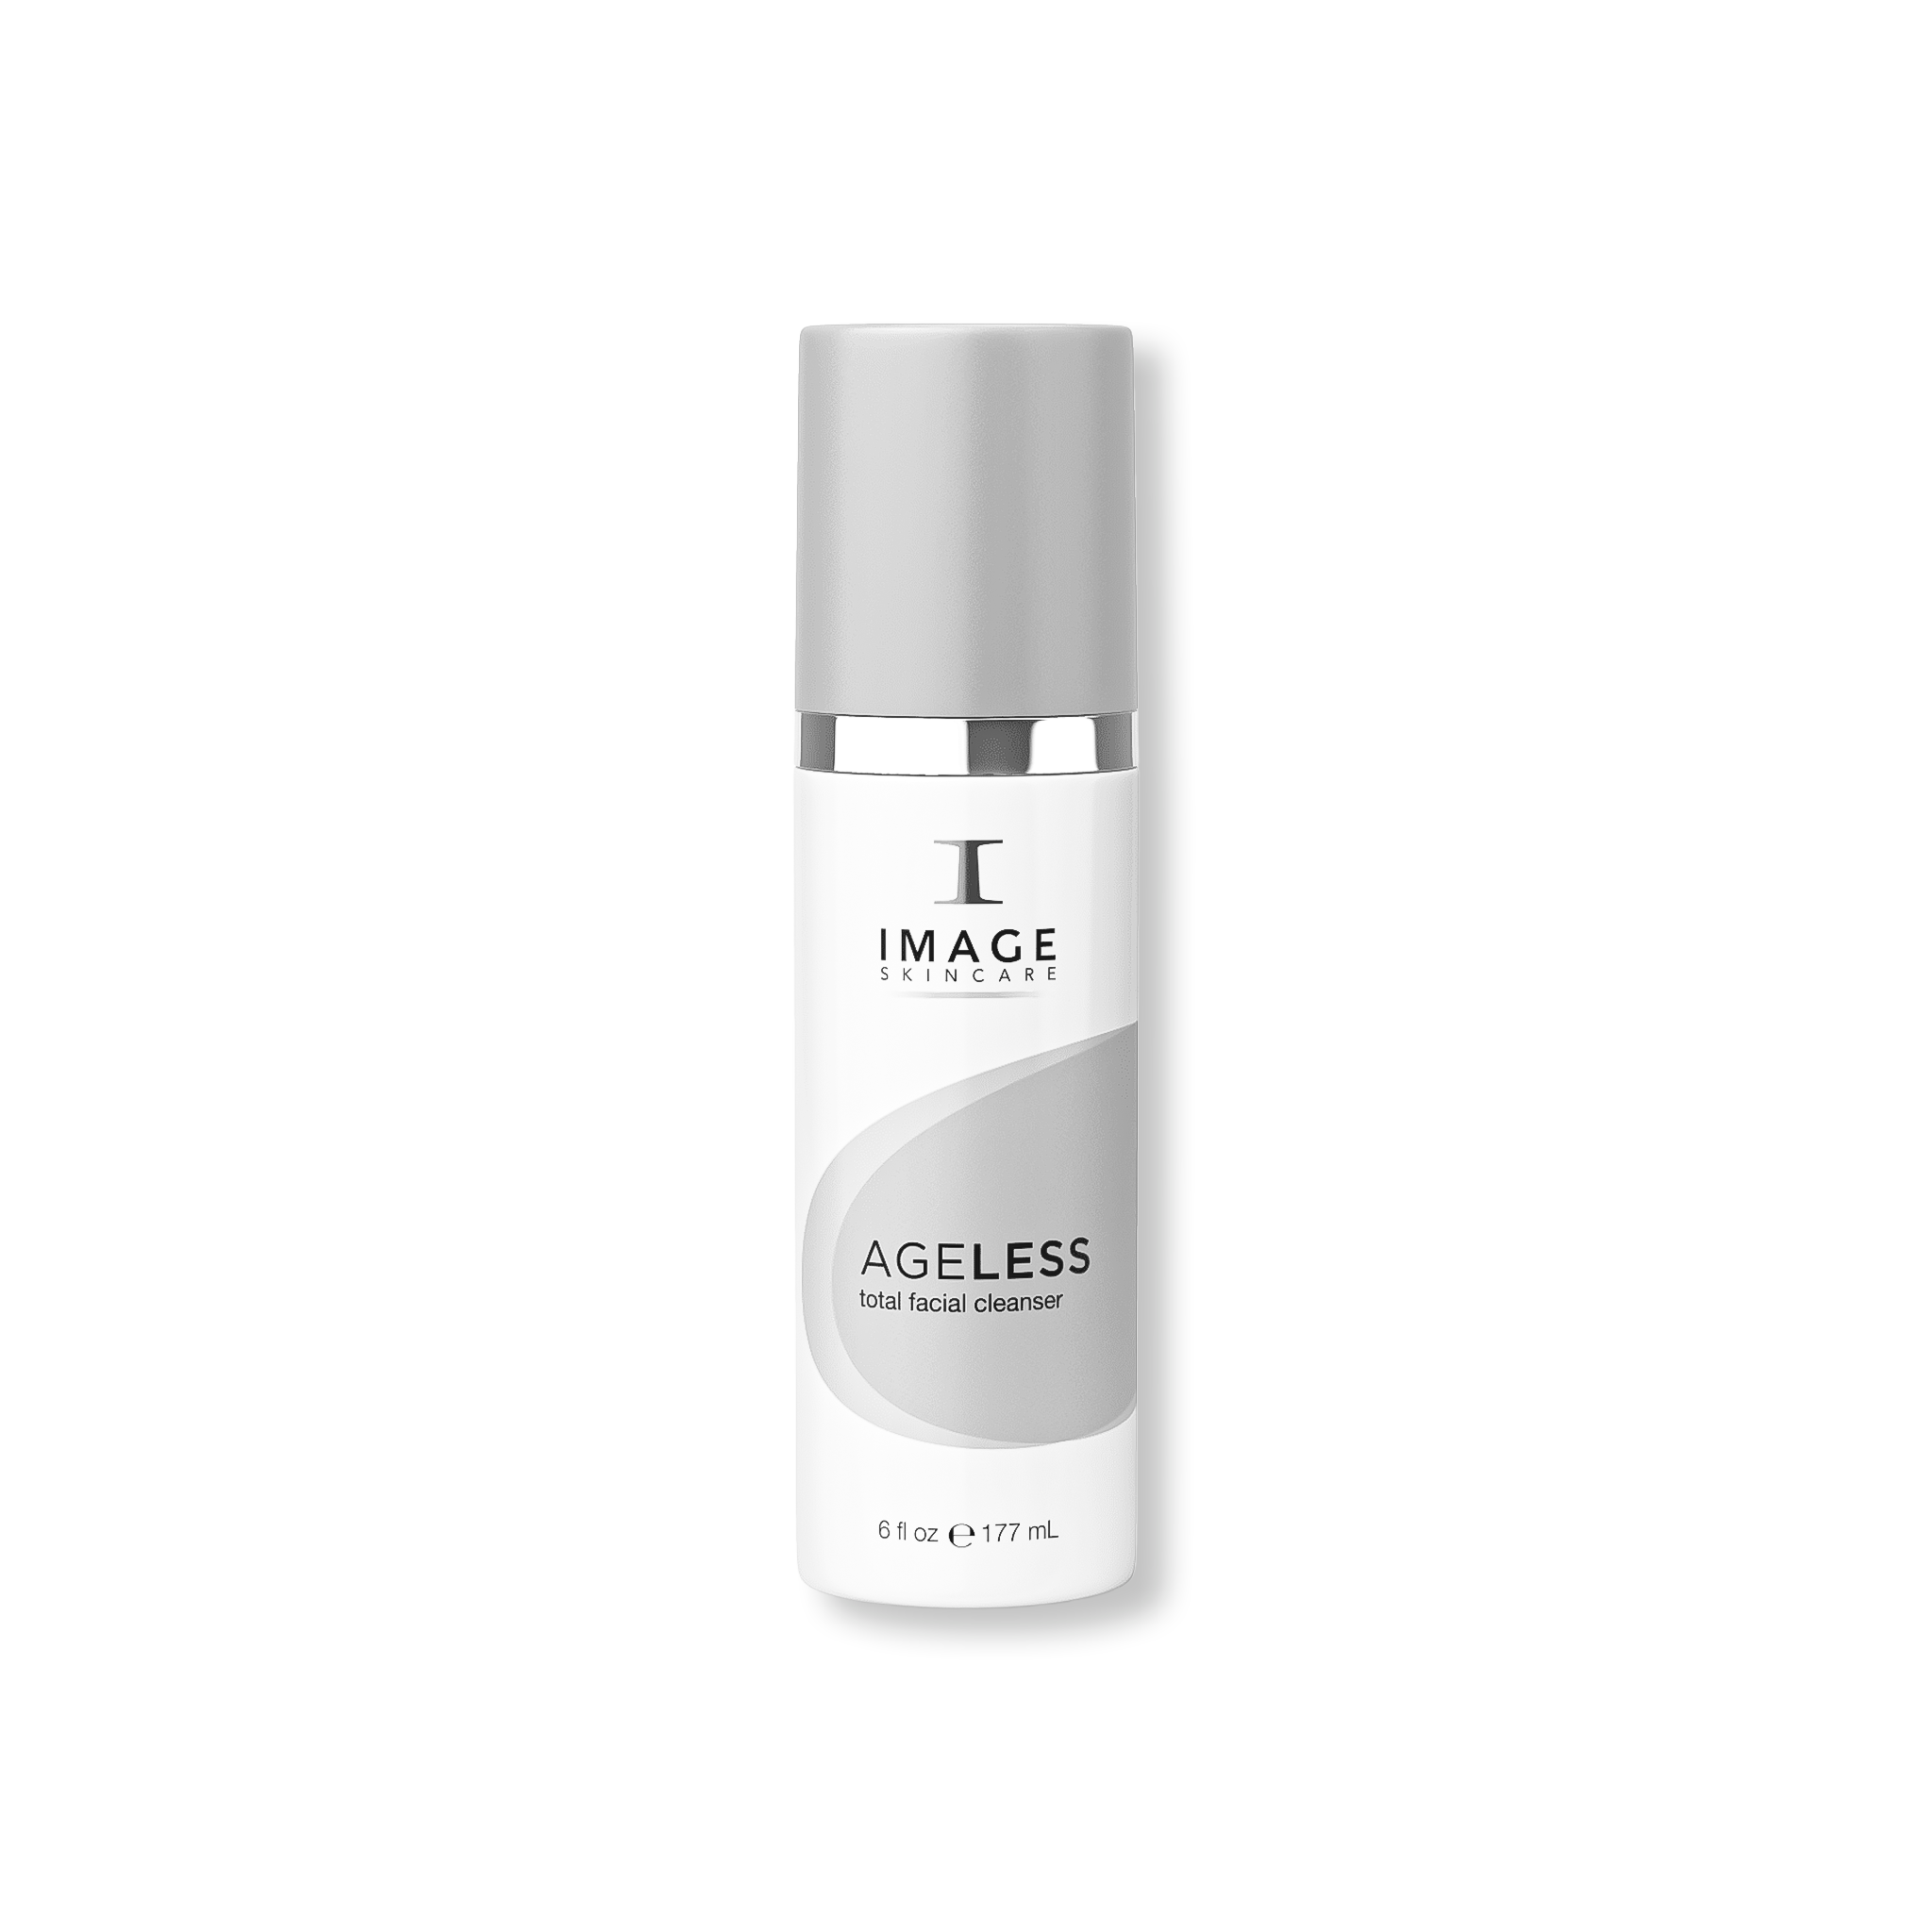 Image Skincare AGELESS Total Facial Cleanser